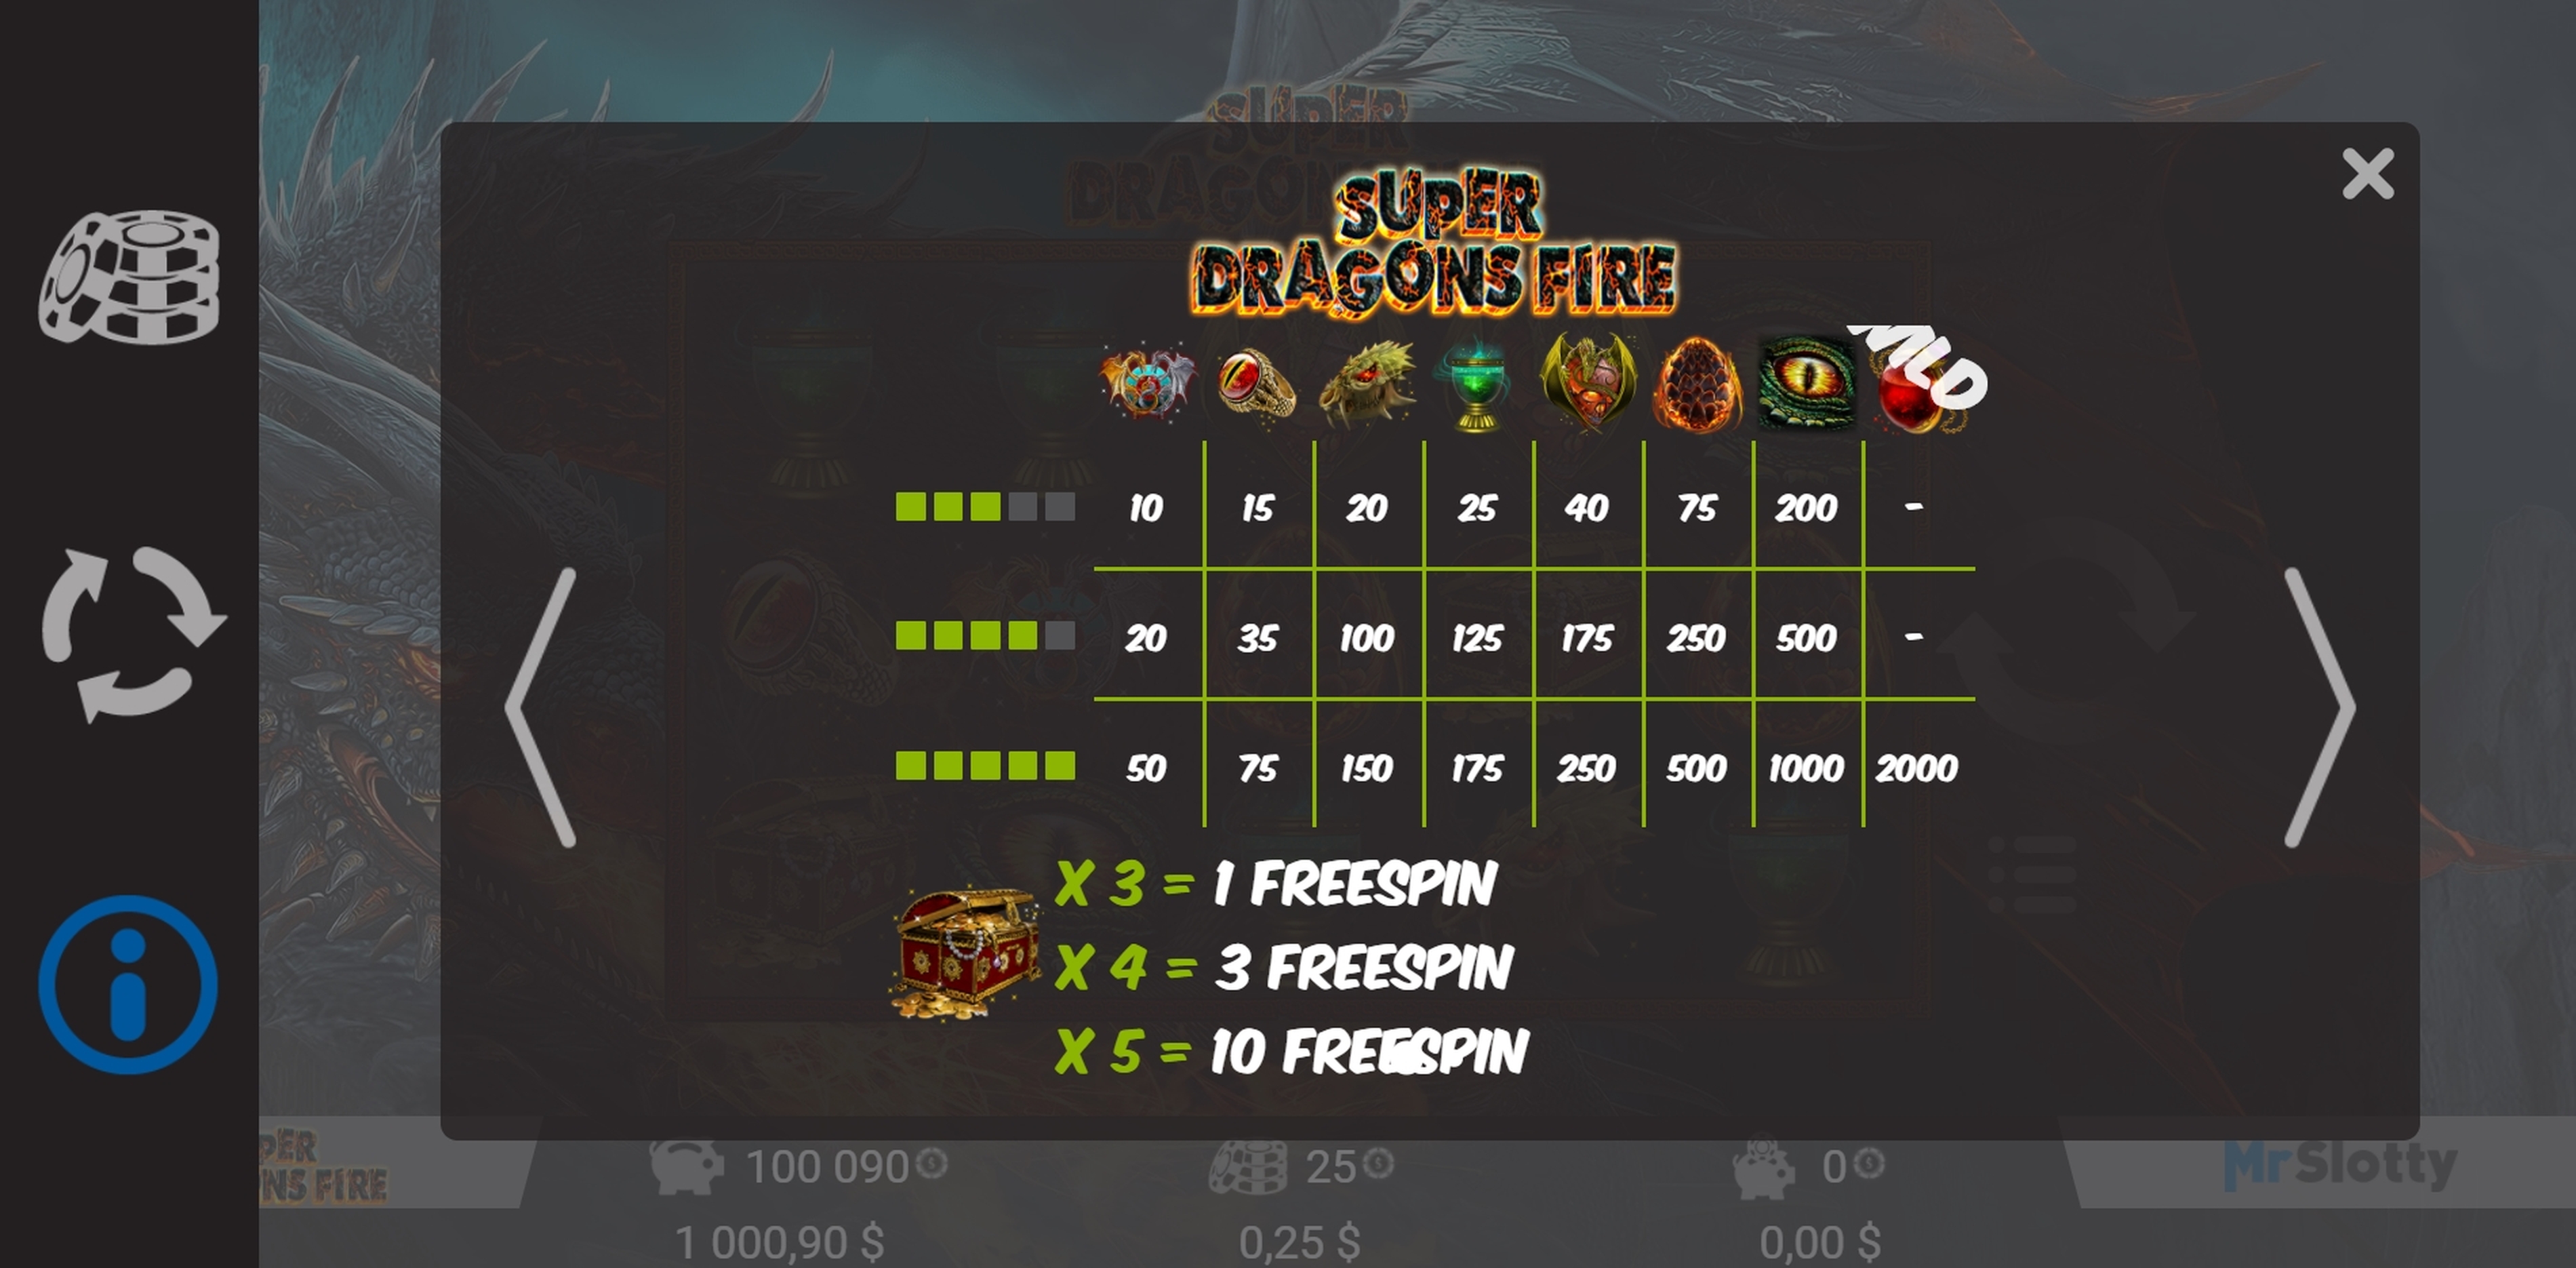 Info of Super Dragons Fire Slot Game by Mr Slotty